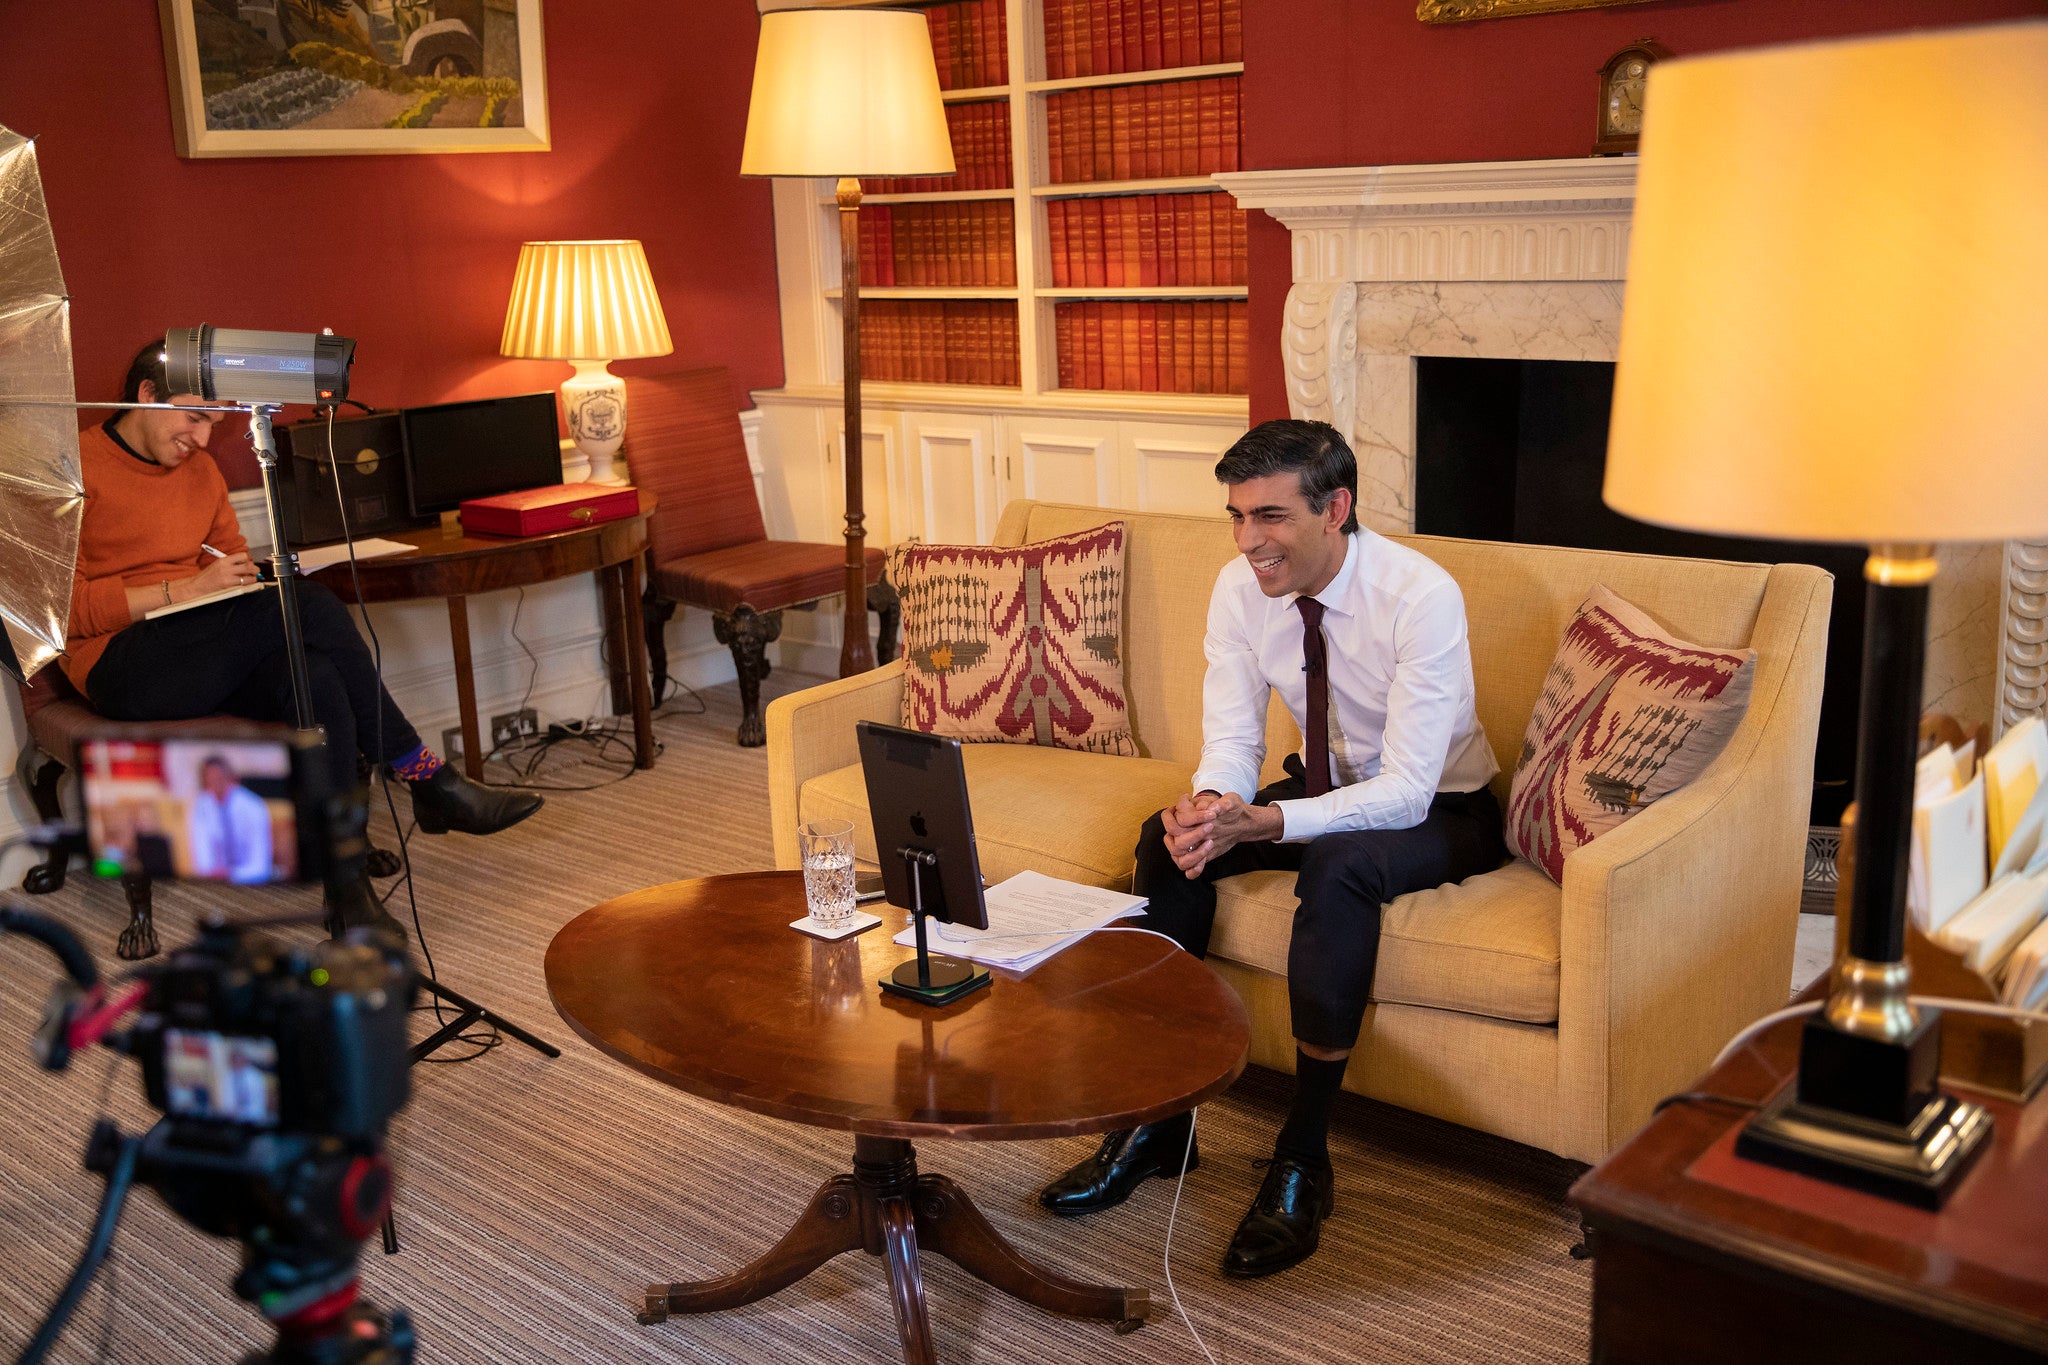 The Treasury has launched a major personal branding and publicity campaign for the chancellor, including a recorded Zoom chat between Mr Sunak and the celebrity chef Gordon Ramsay